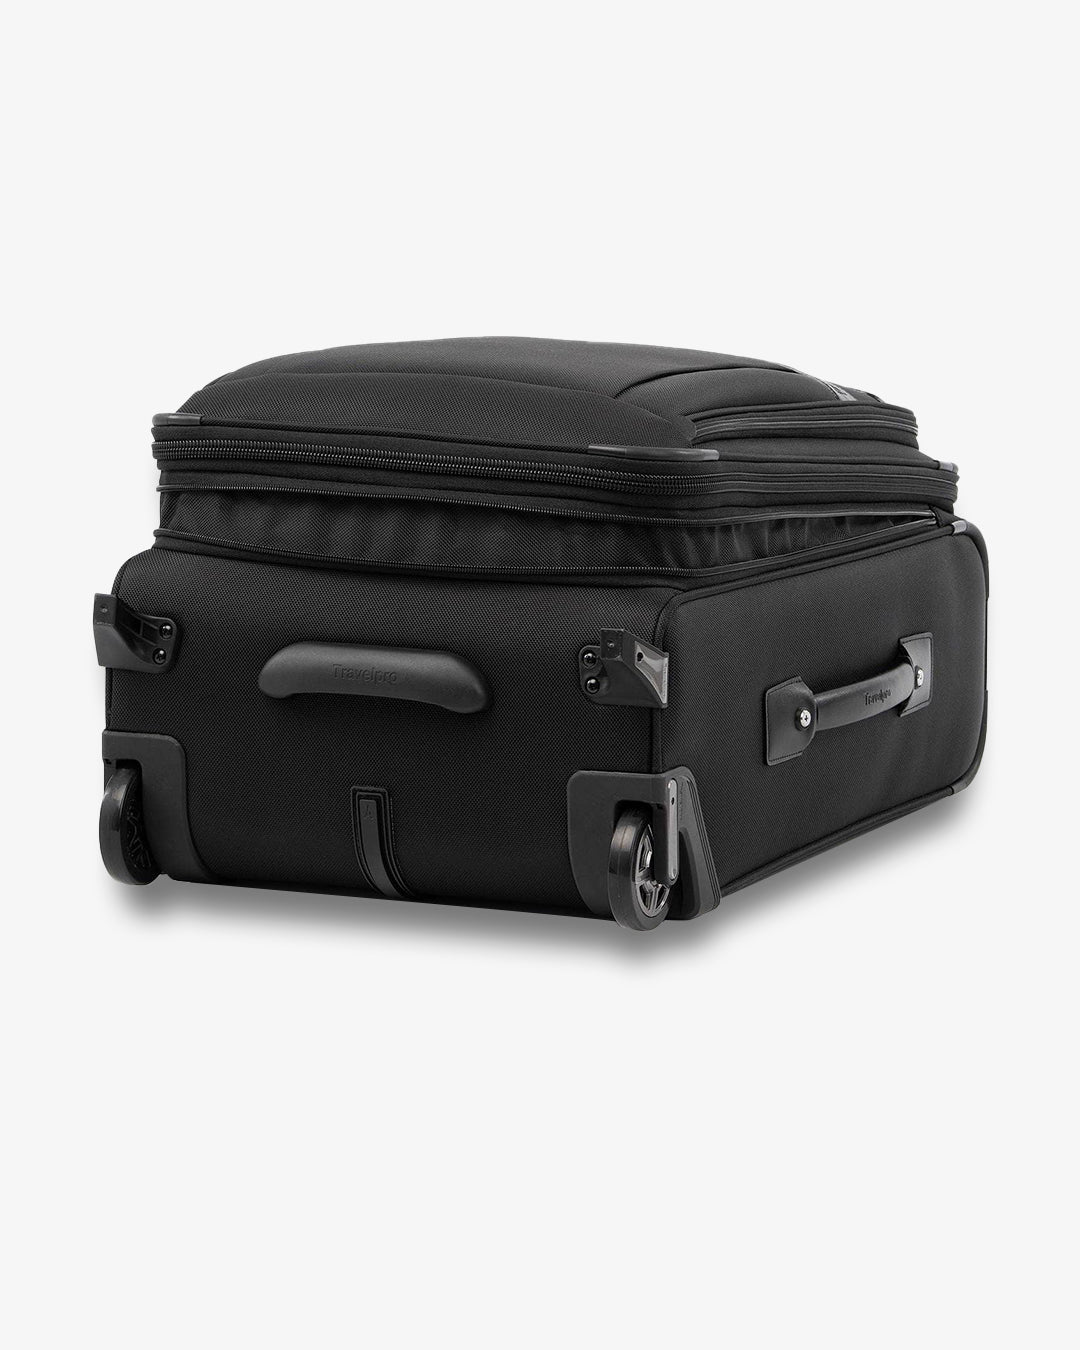 Travelpro Platinum® Elite 22” Carry-On Expandable Rollaboard®